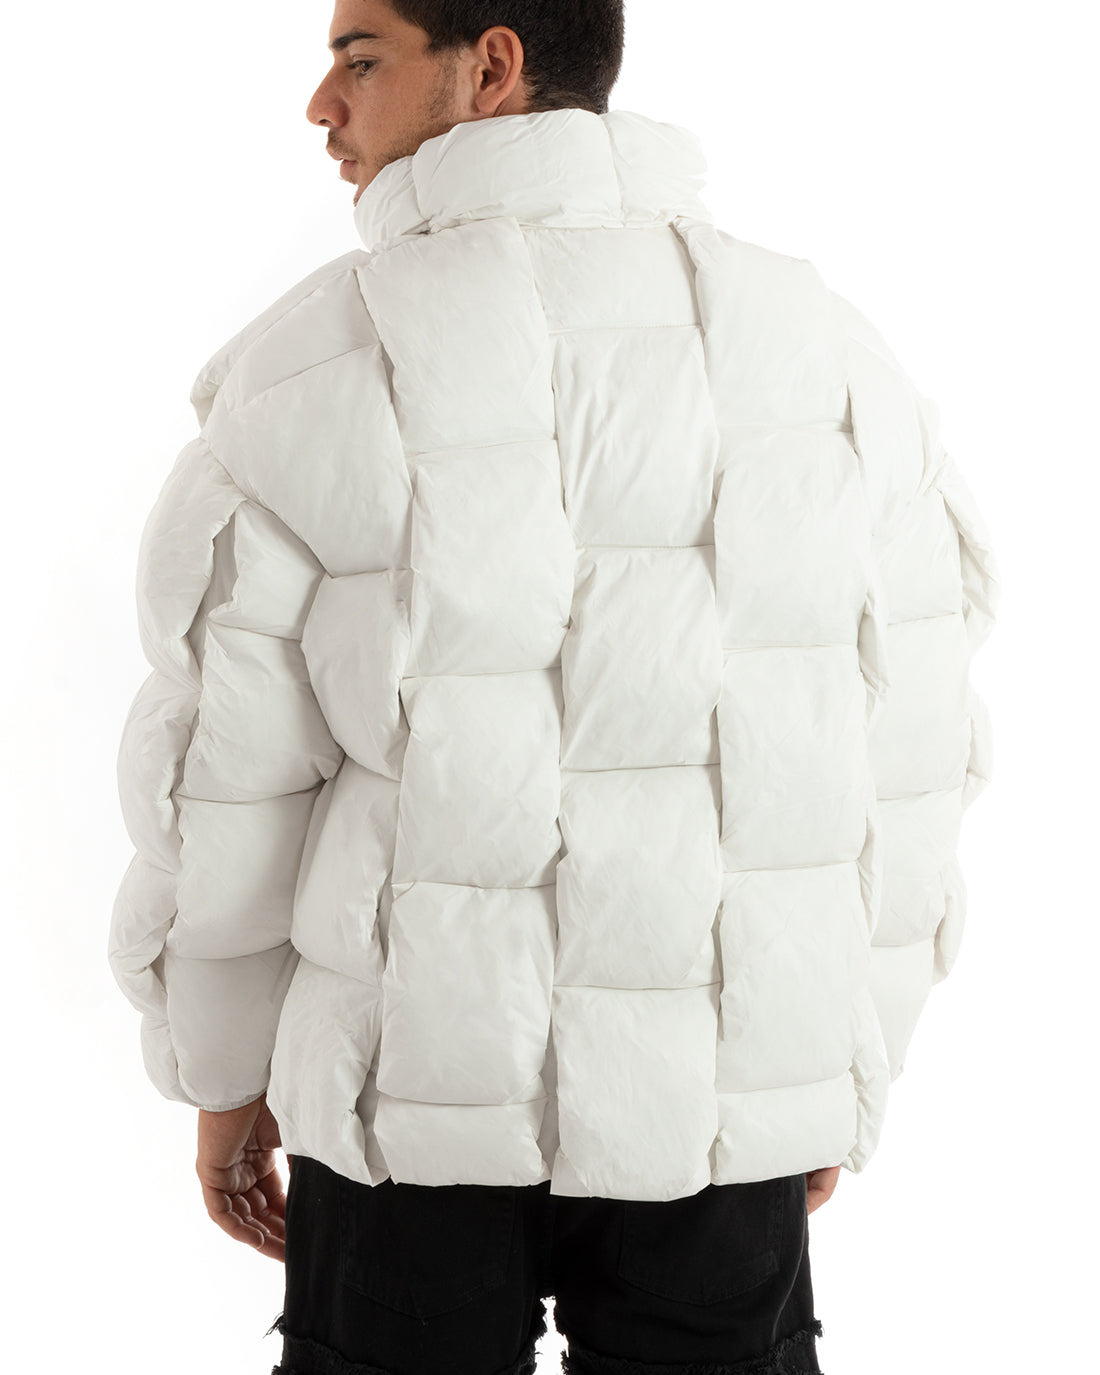 Men's Padded Bomber Jacket with Woven Bands Solid White Casual GIOSAL-G3082A